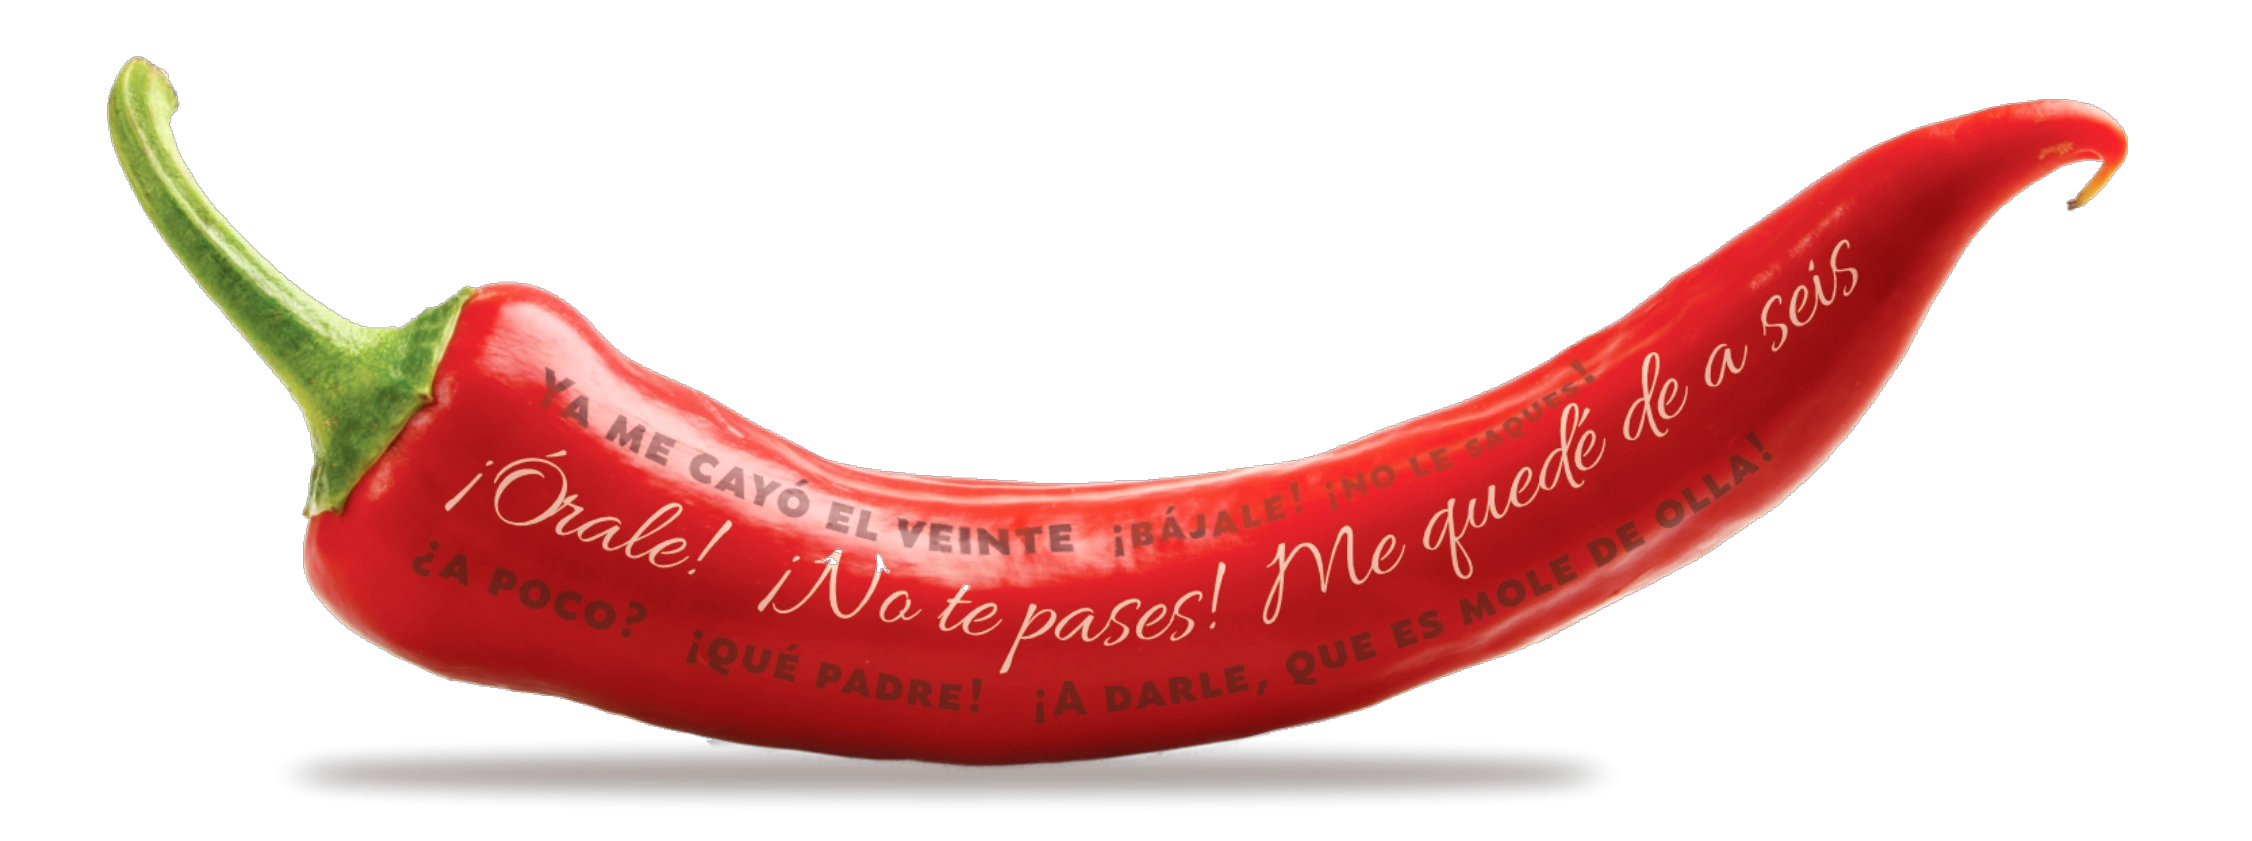 Mexican Spanish phrases on a chili pepper